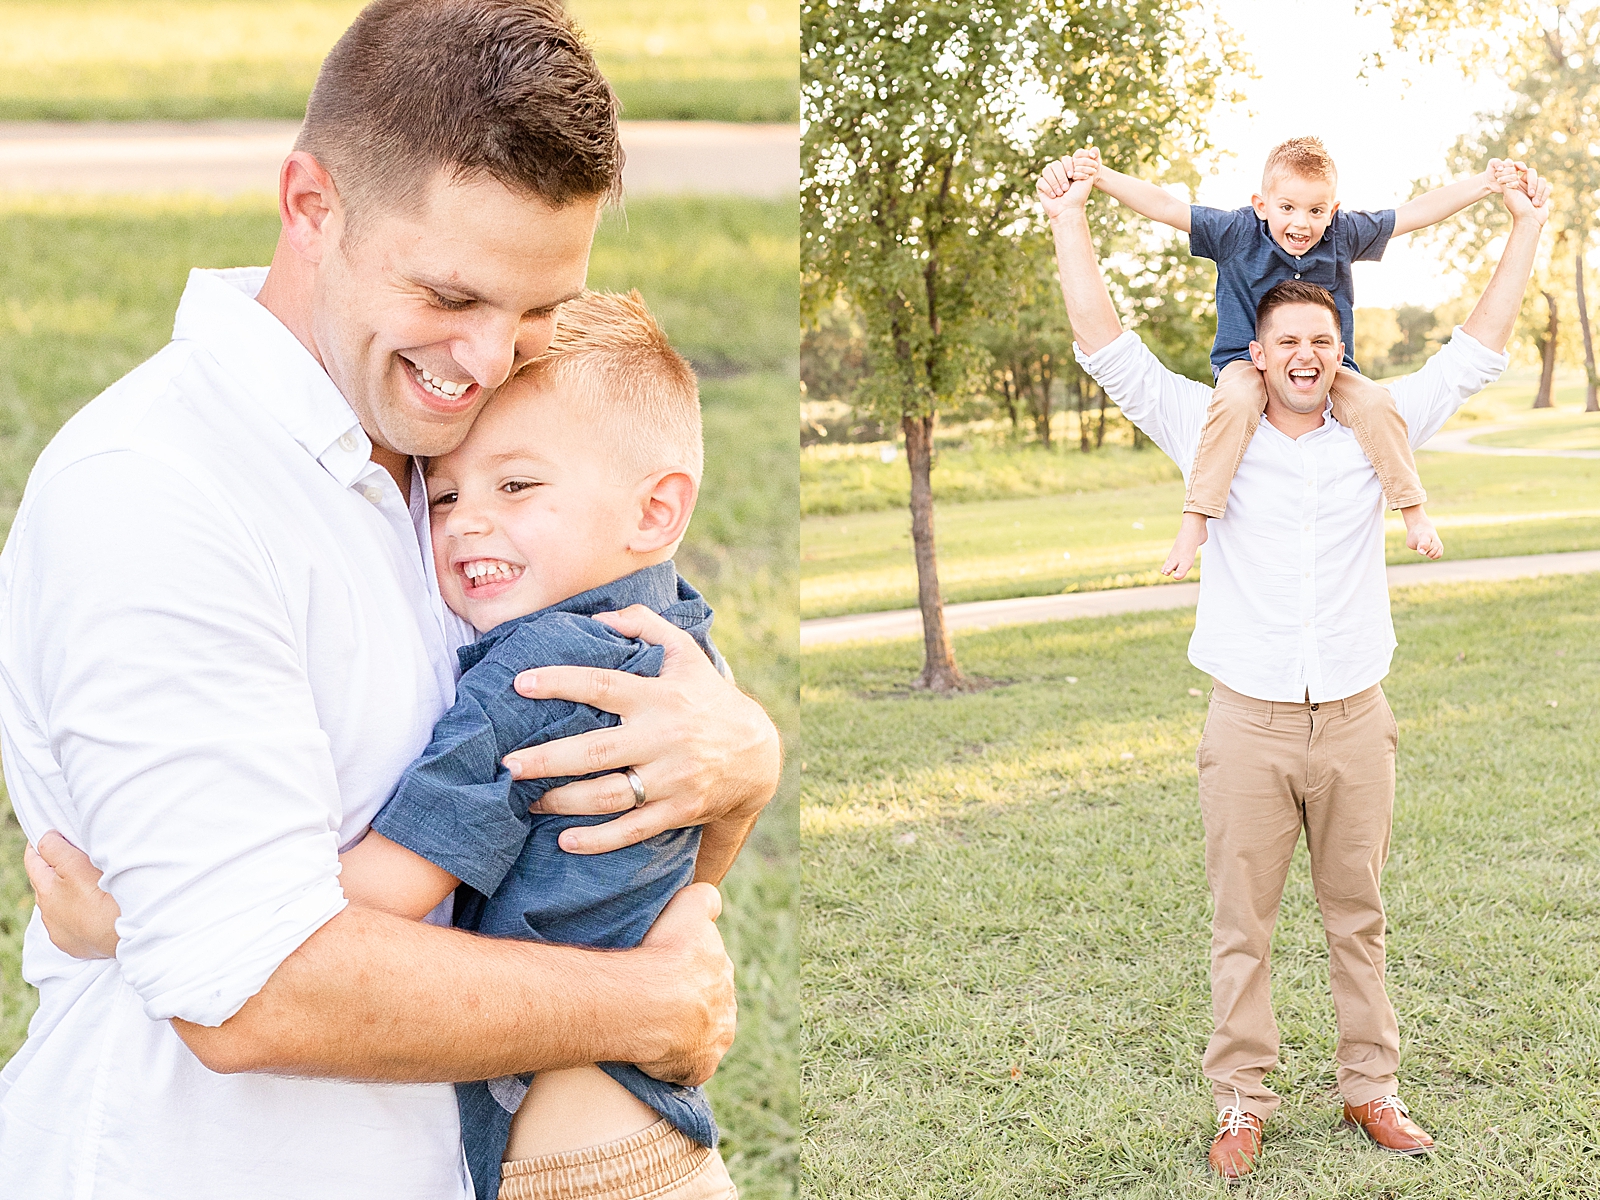 dad and son give each other a big hug during family session and son rides on his dads shoulders with their arms up in the air having fun